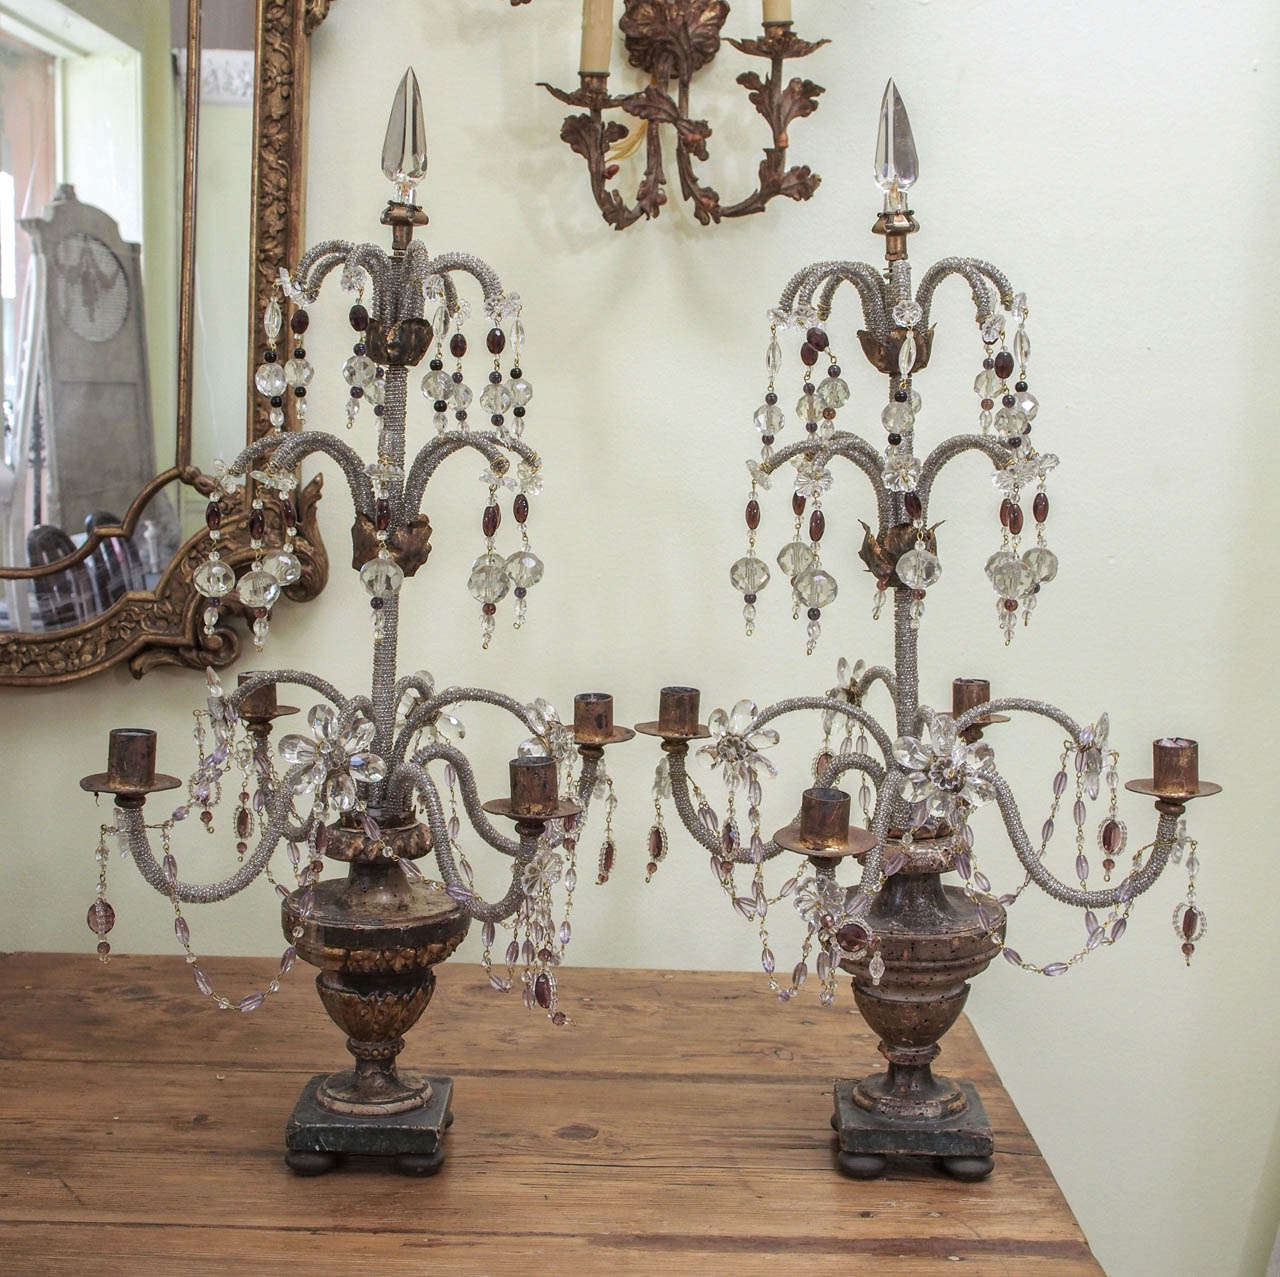 Pair of Italian c. 1880 girondoles.  Four candle arms extend from a central axis mounted on a carved painted and giltwood urn on a square base which is raised on small bun shaped feet.   Beaded crystal ropes encrust the central axis, the surrounding